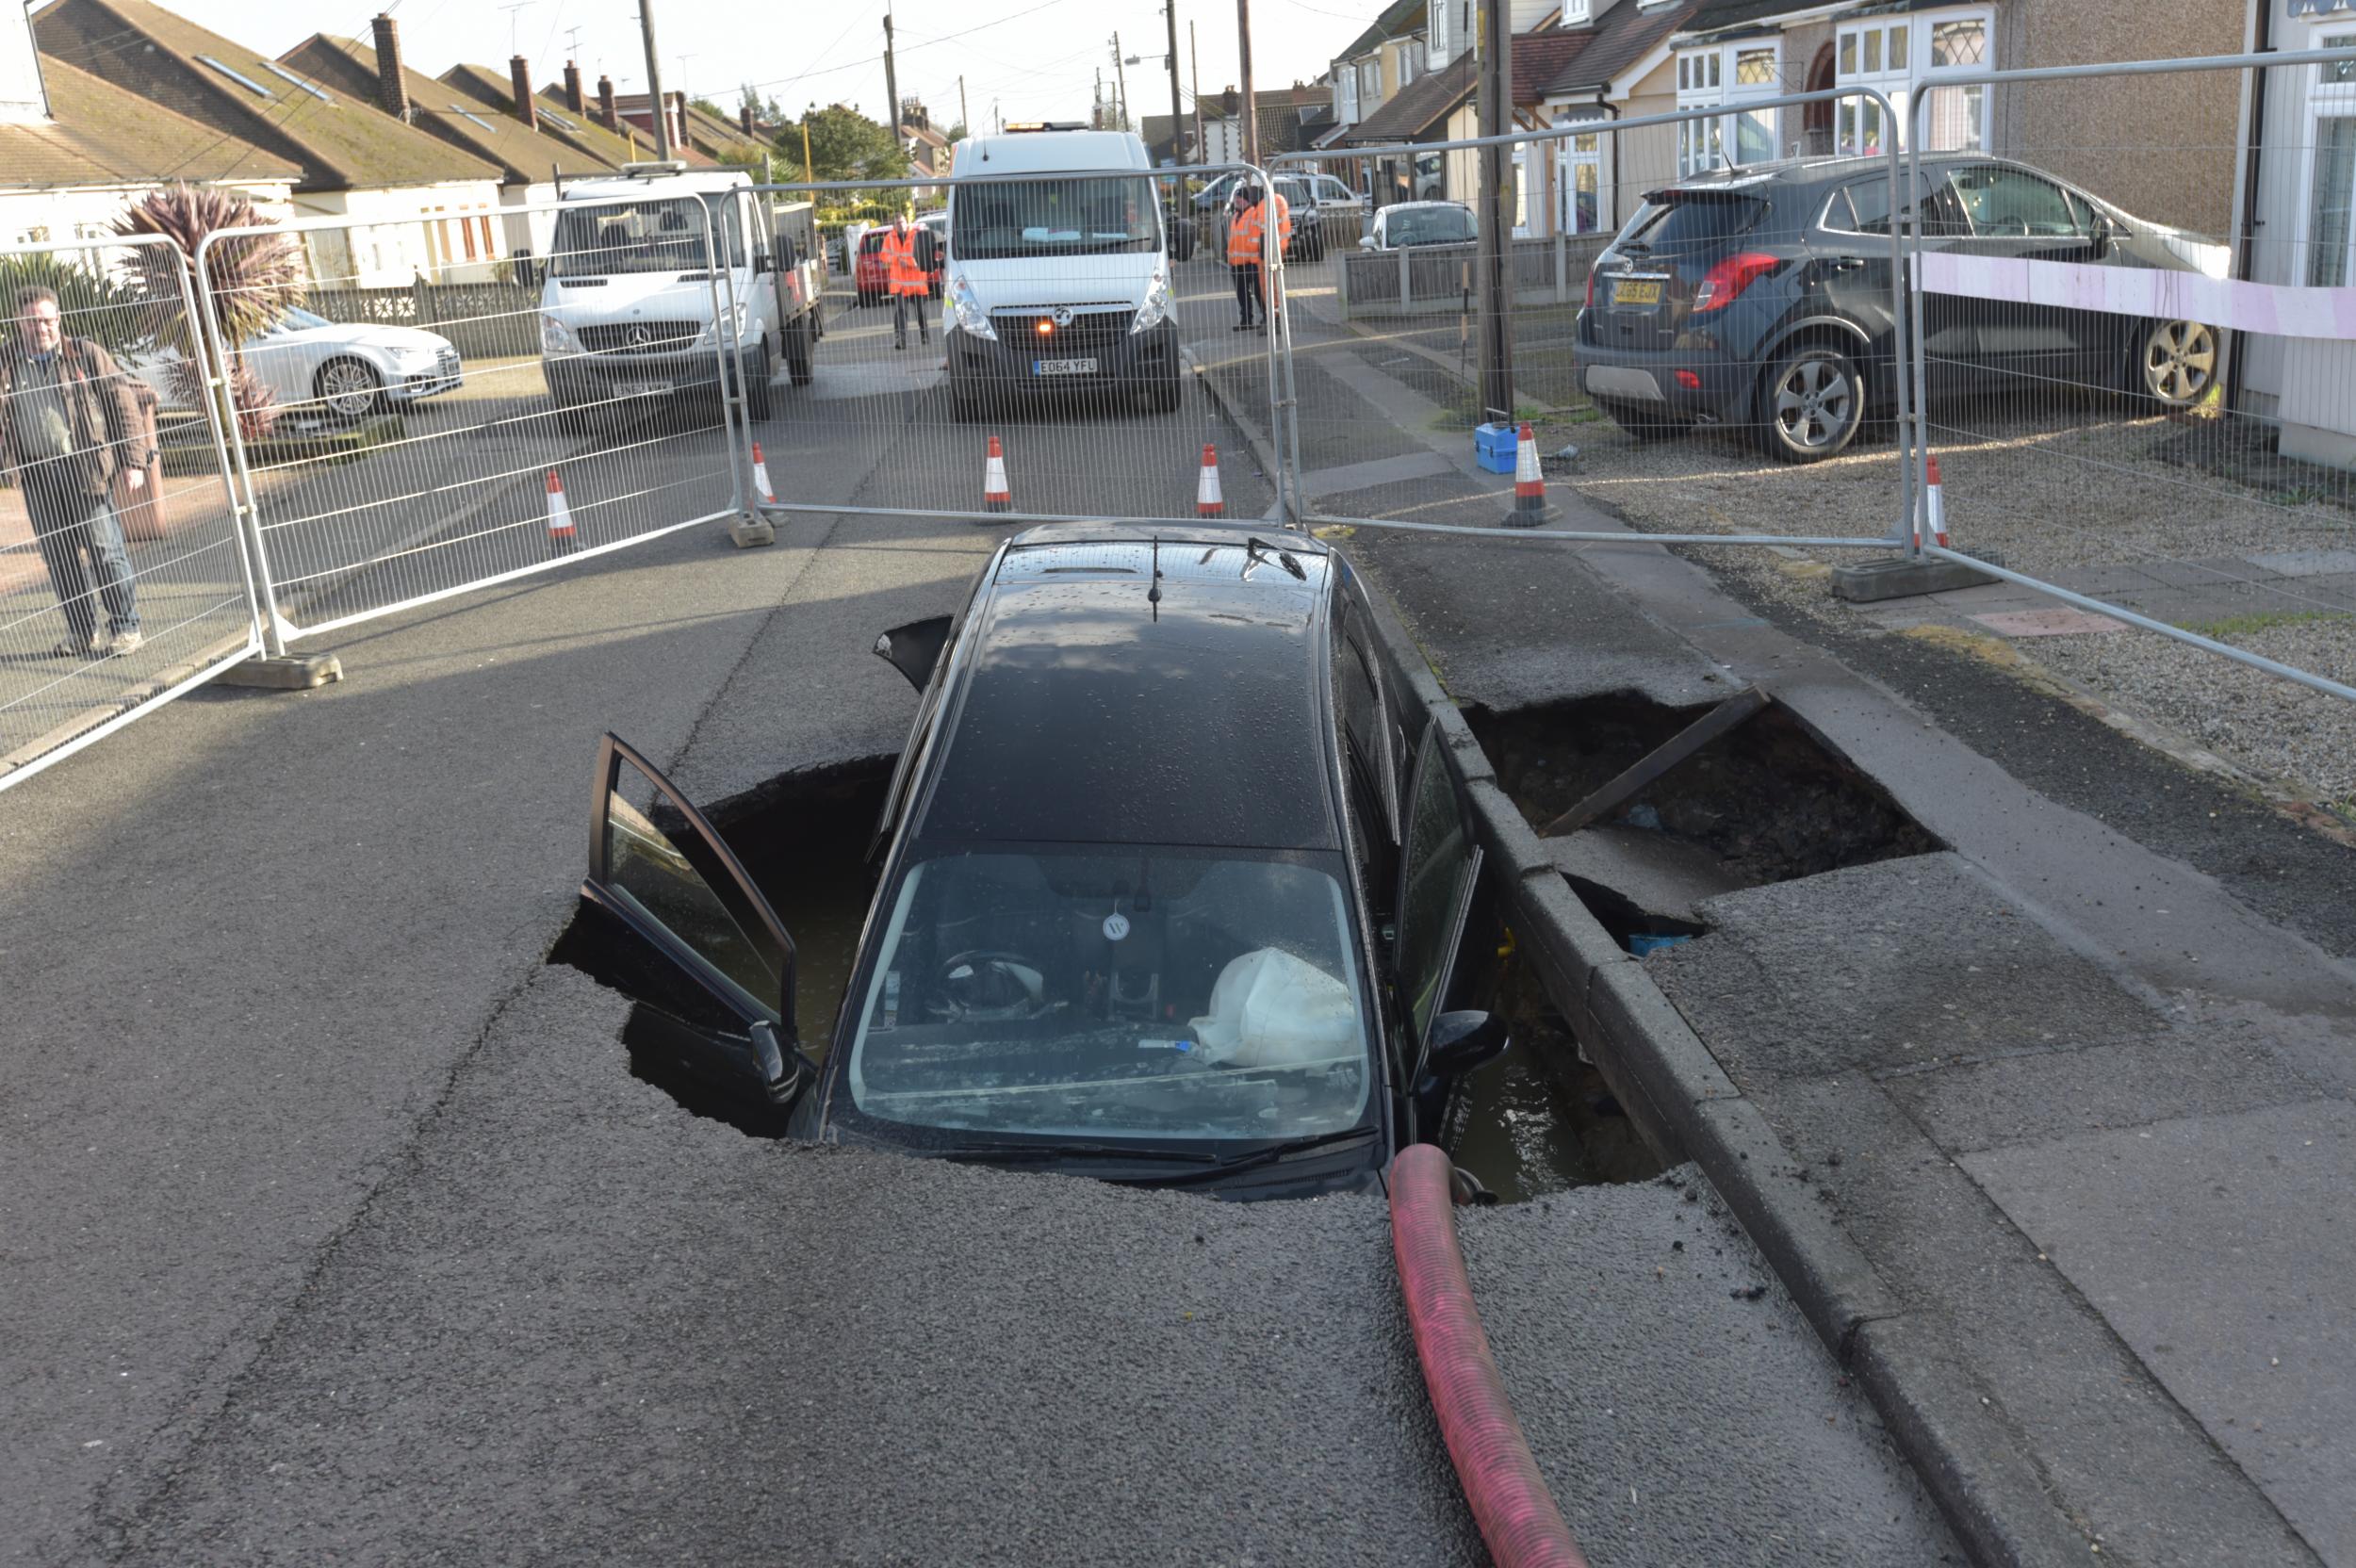 A Toyota car in a sinkhole which appeared overnight in Hatch Road, Brentwood, in the wake of Storm Ciara.